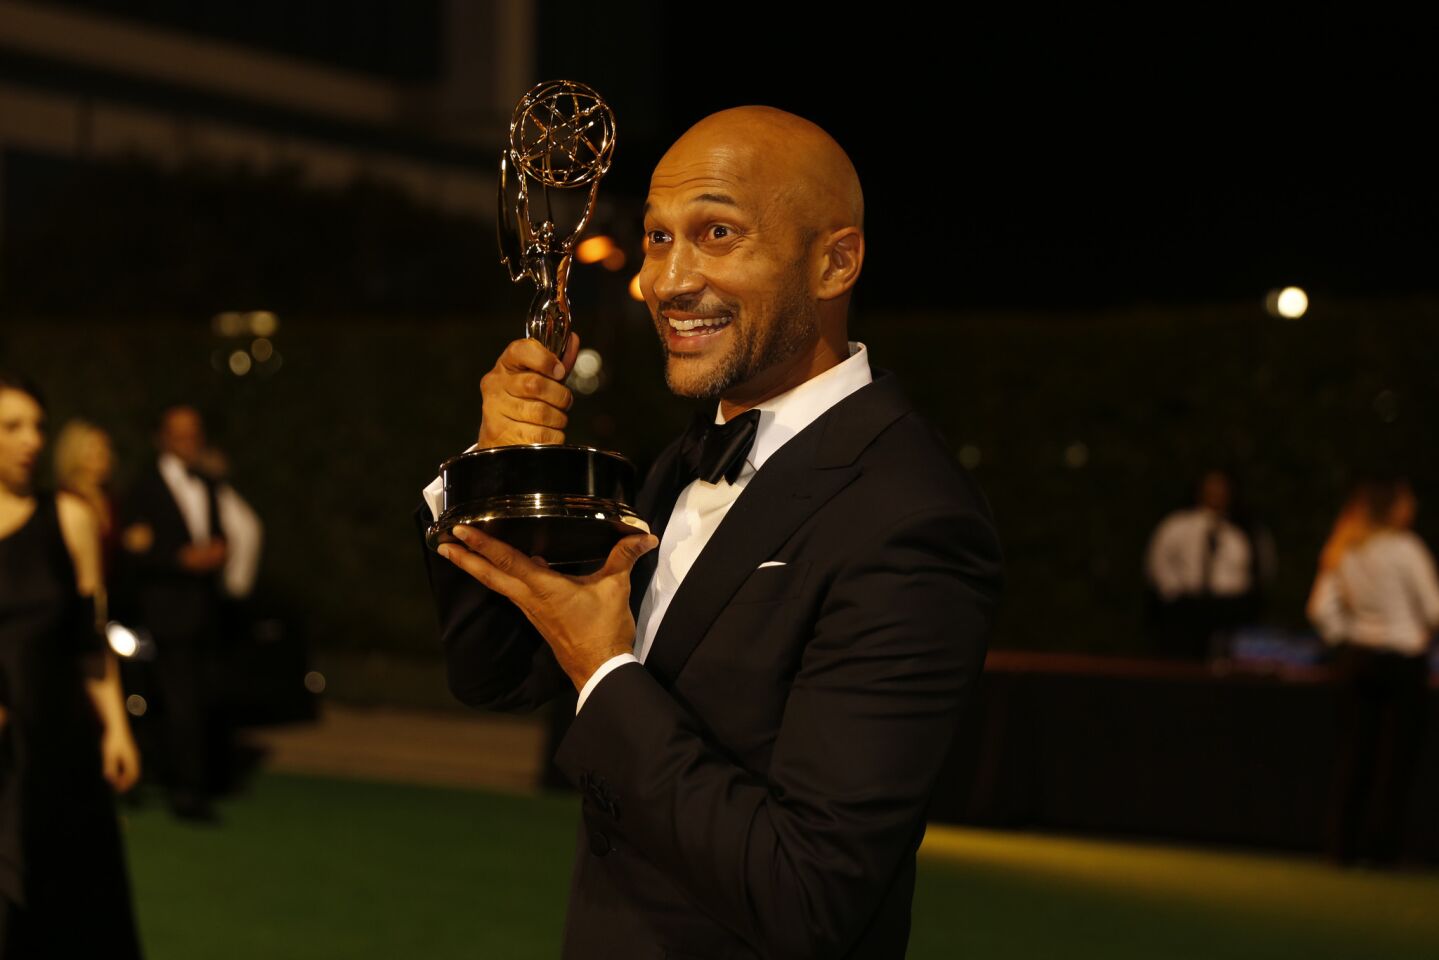 Keegan-Michael Key at the Governors Ball after the 68th Primetime Emmy Awards.